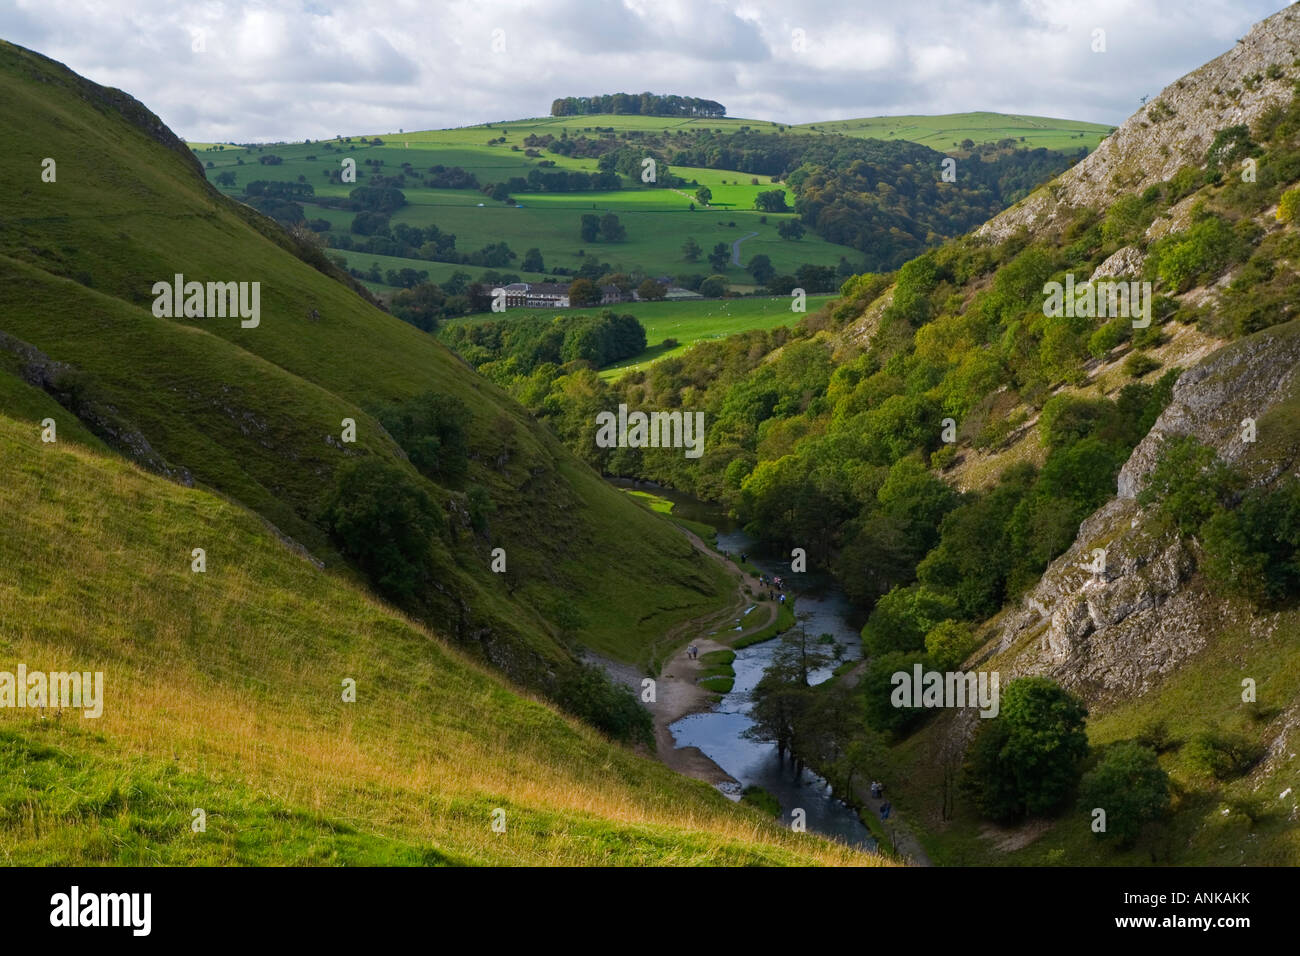 View of Dovedale from the slopes of Thorpe Cloud in the Peak District National Park England UK Stock Photo